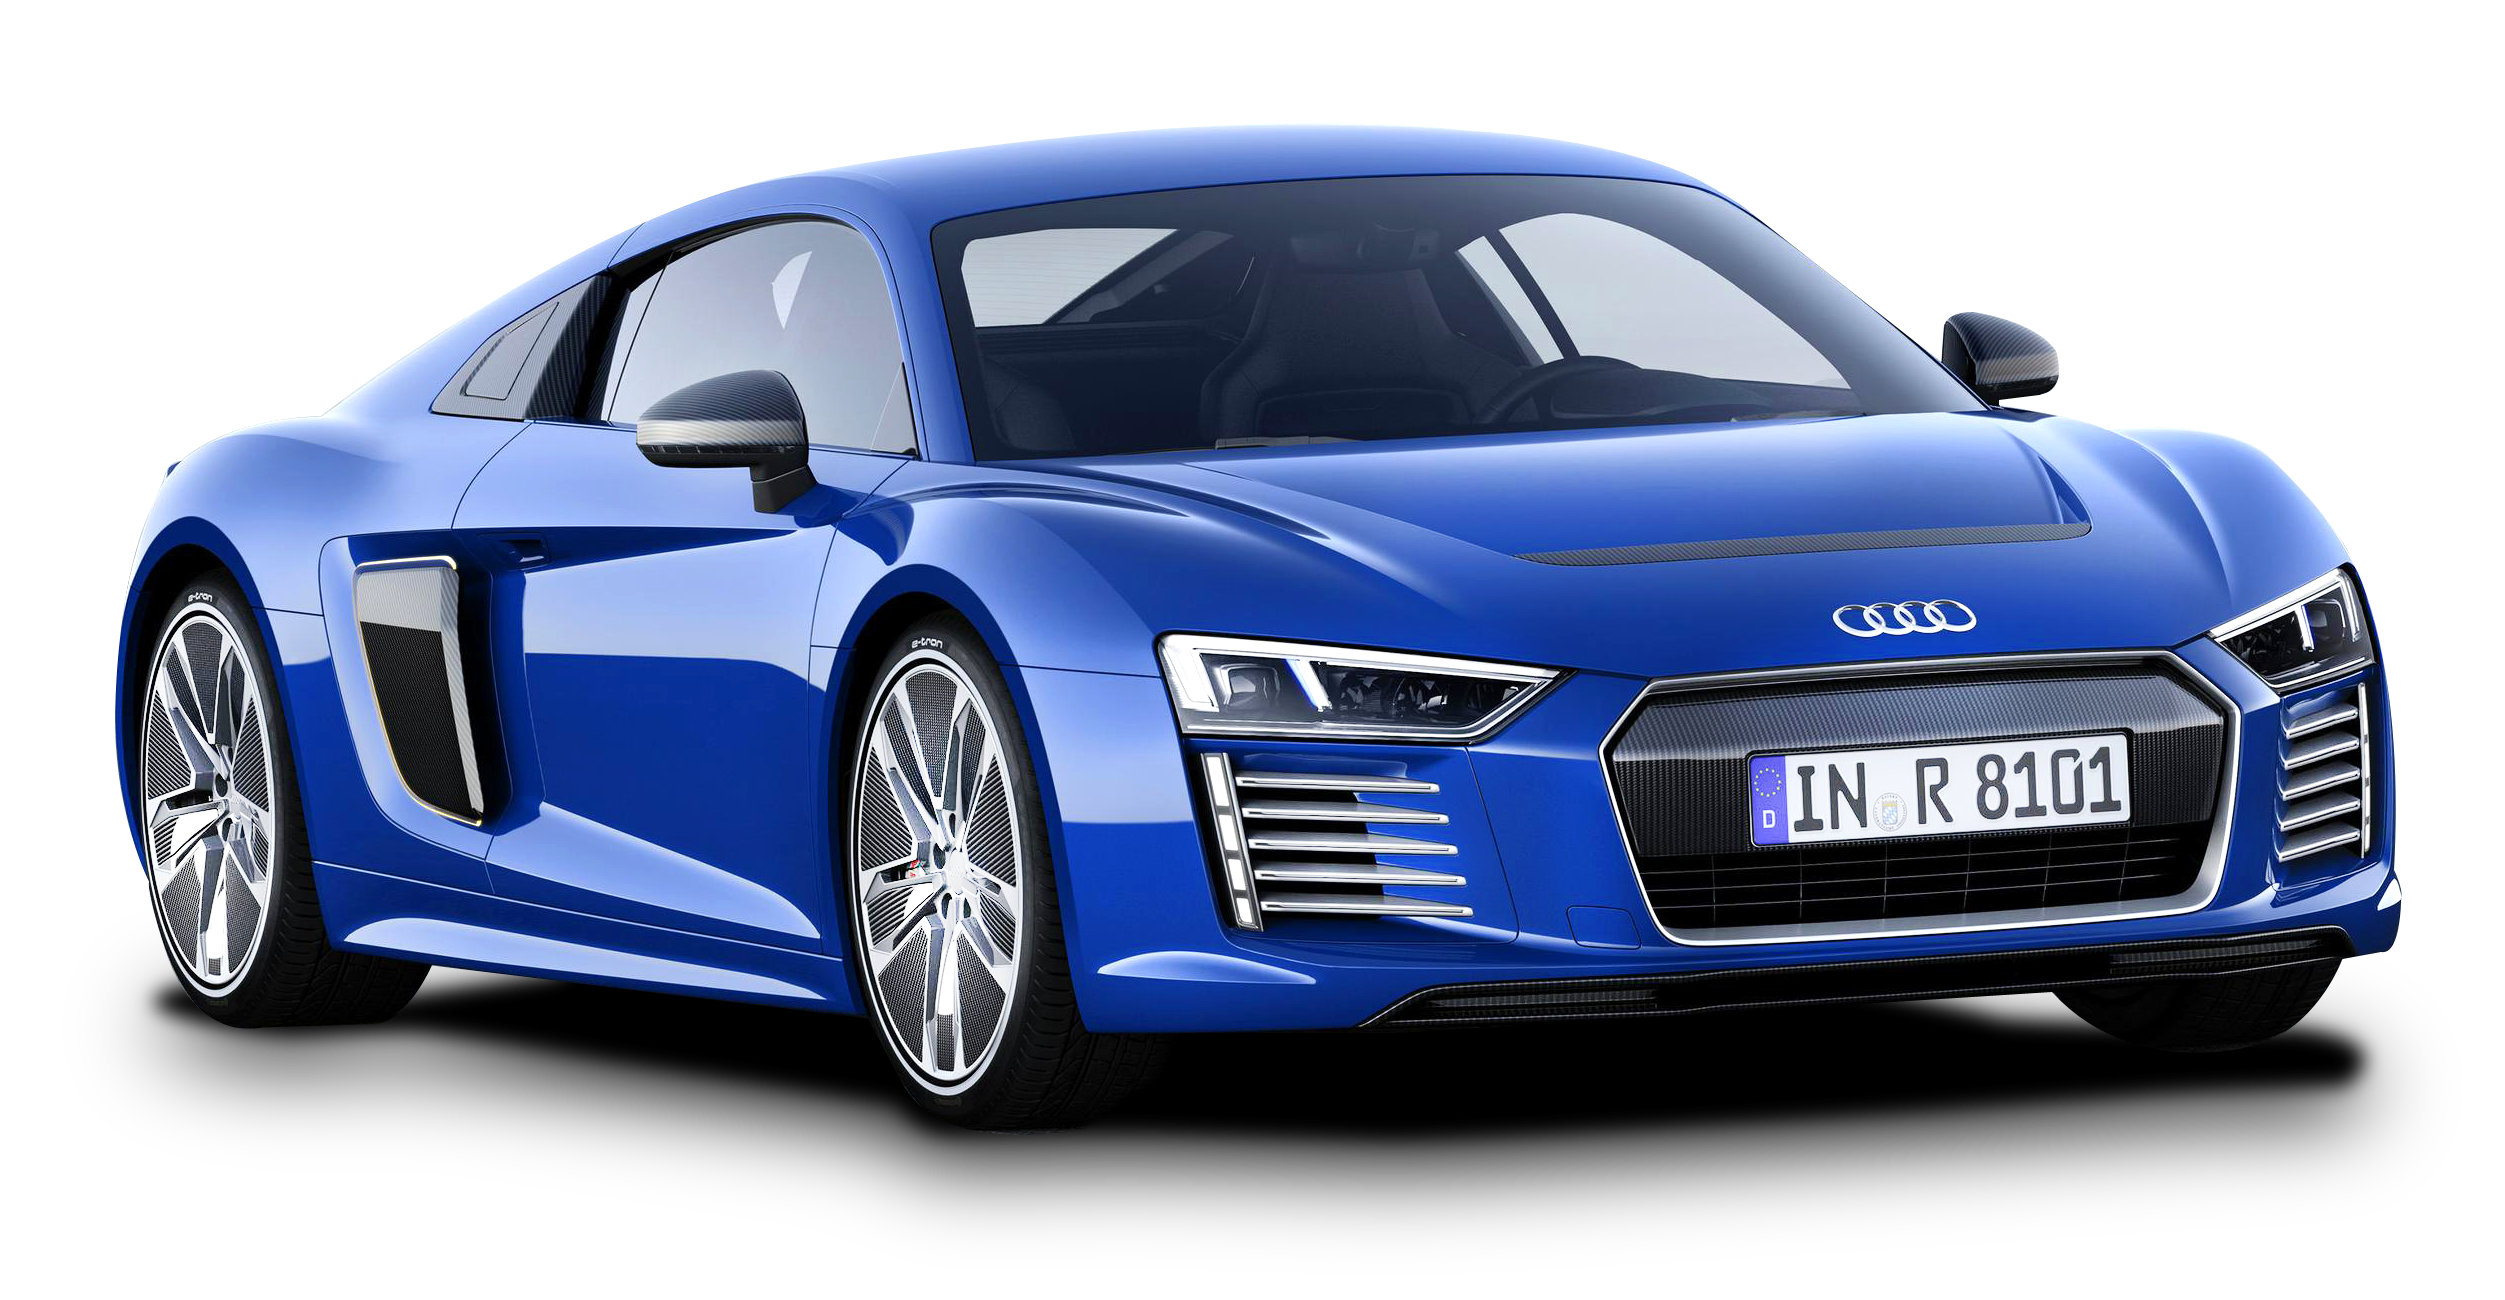 Png Hd Images Of Cars Hdpng.com 2505 - Images Of Cars, Transparent background PNG HD thumbnail